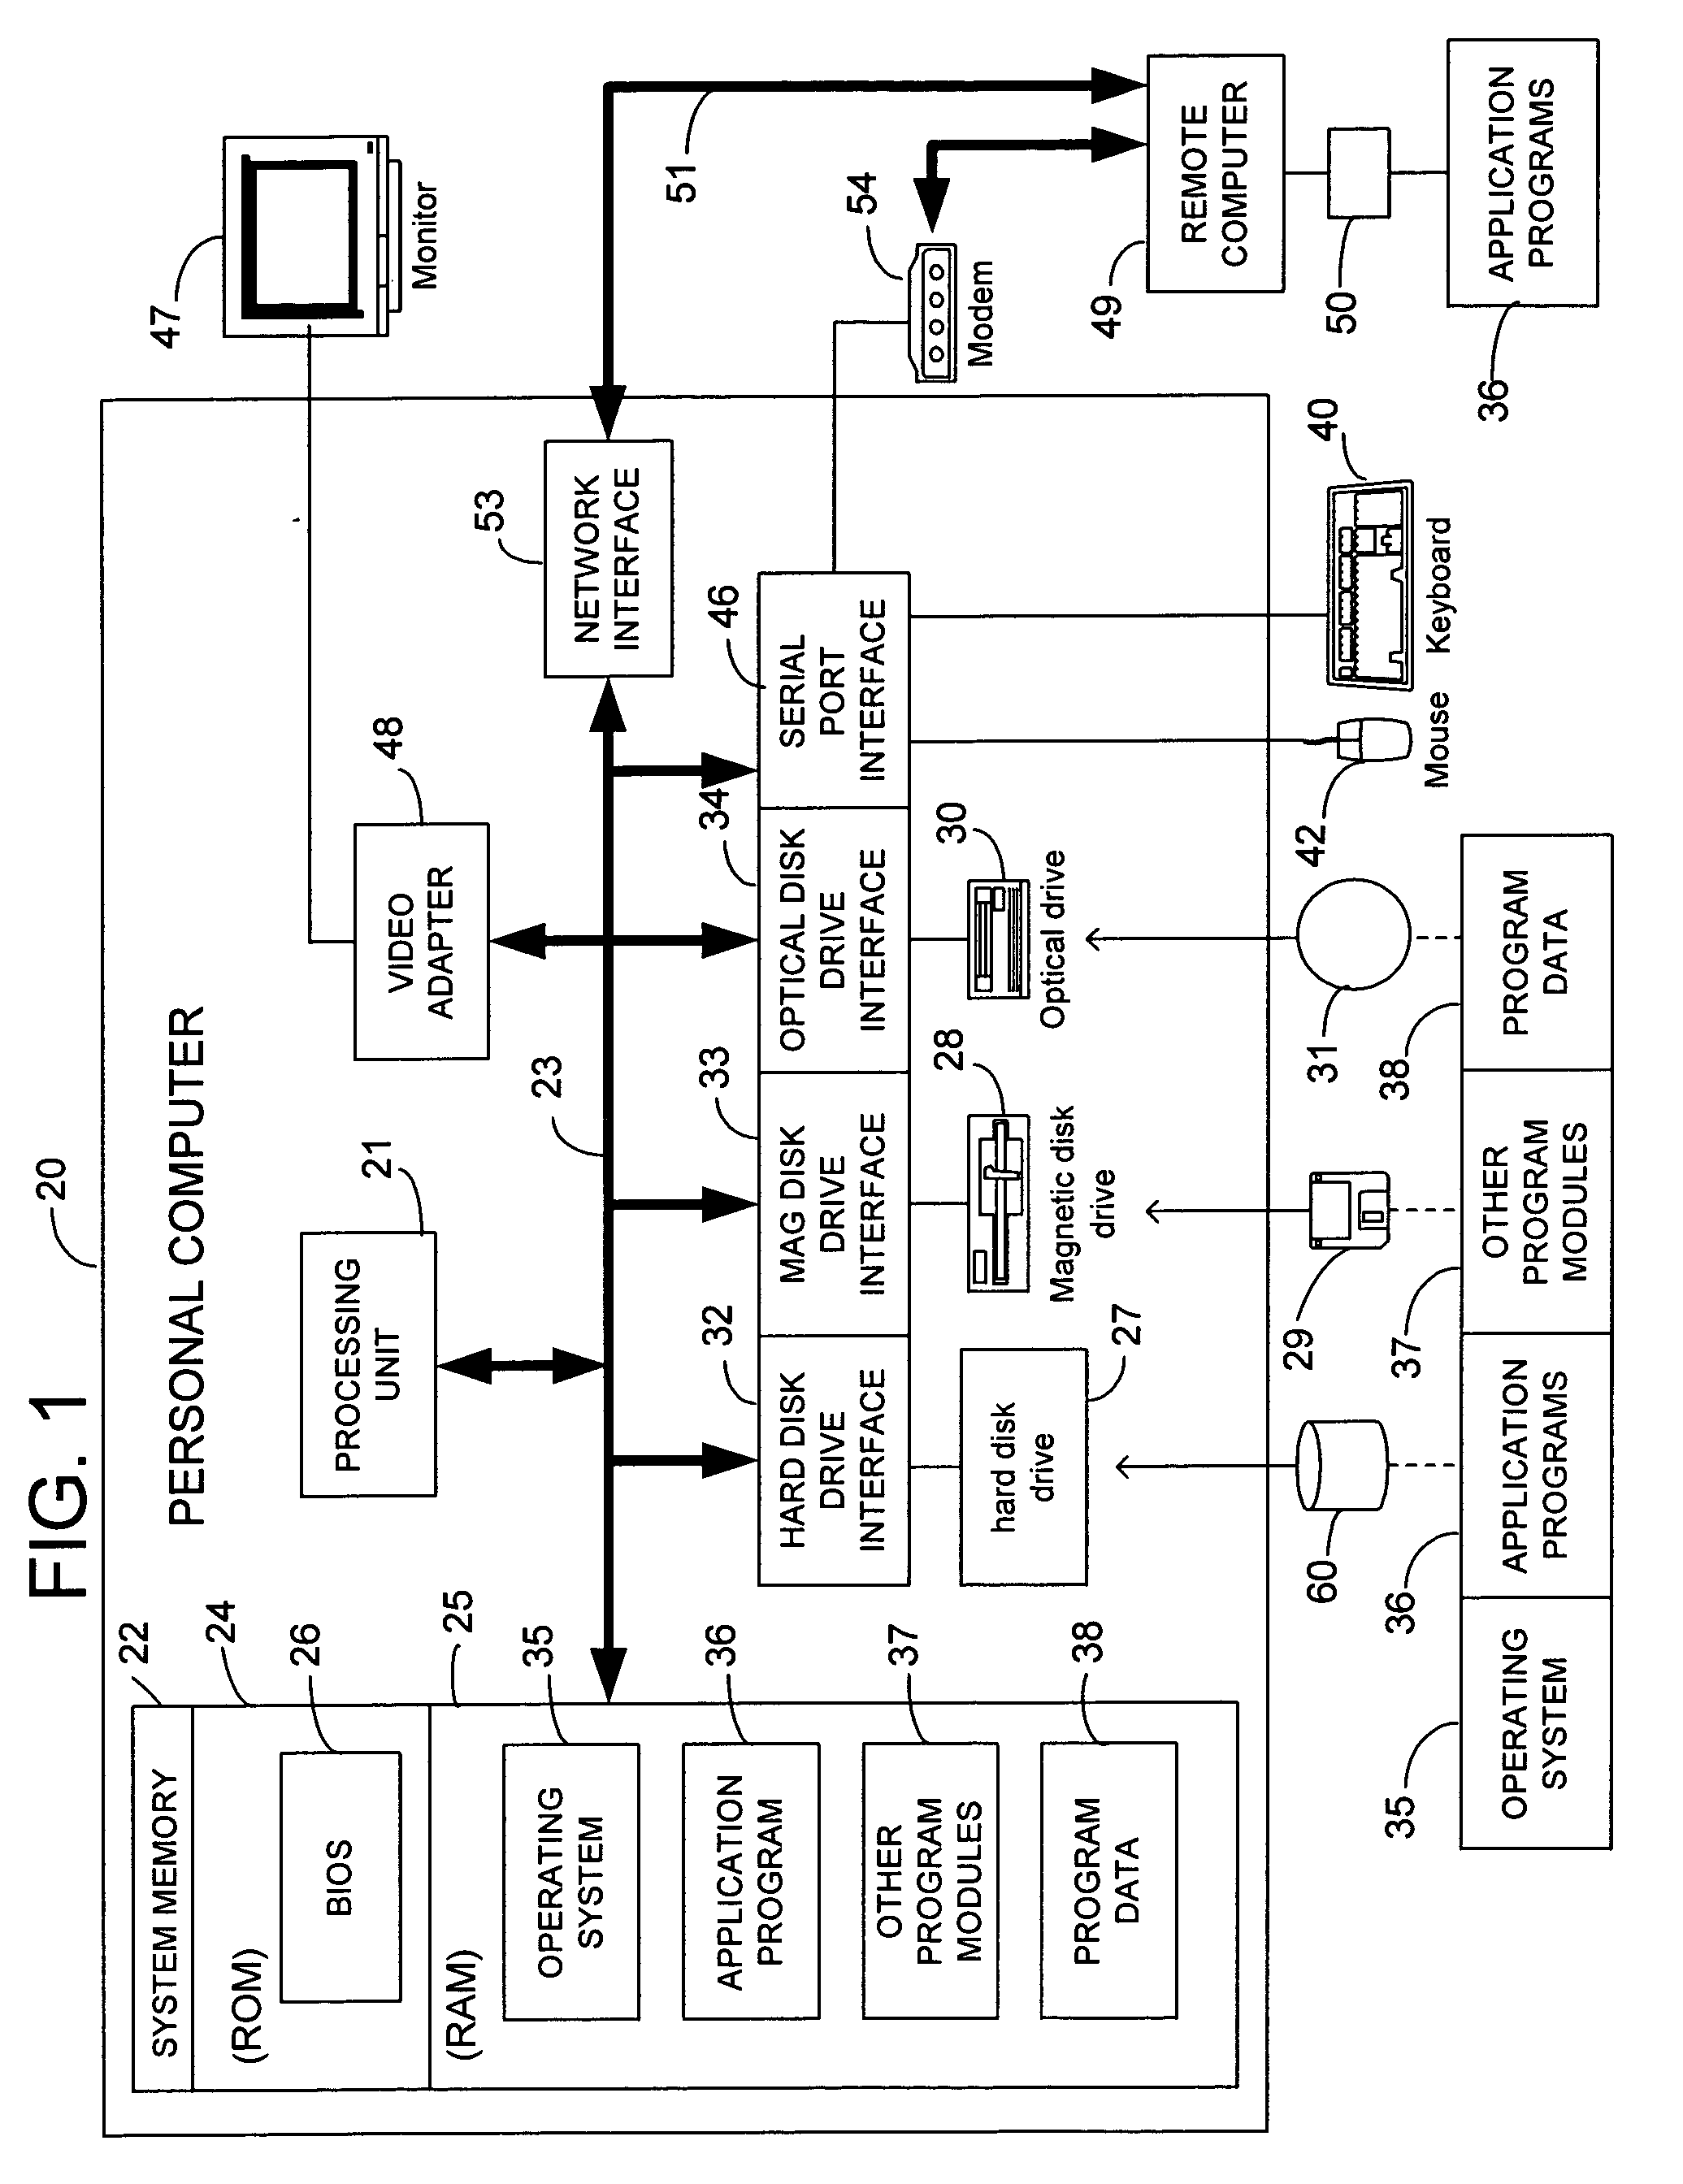 Communication stack for network communication and routing